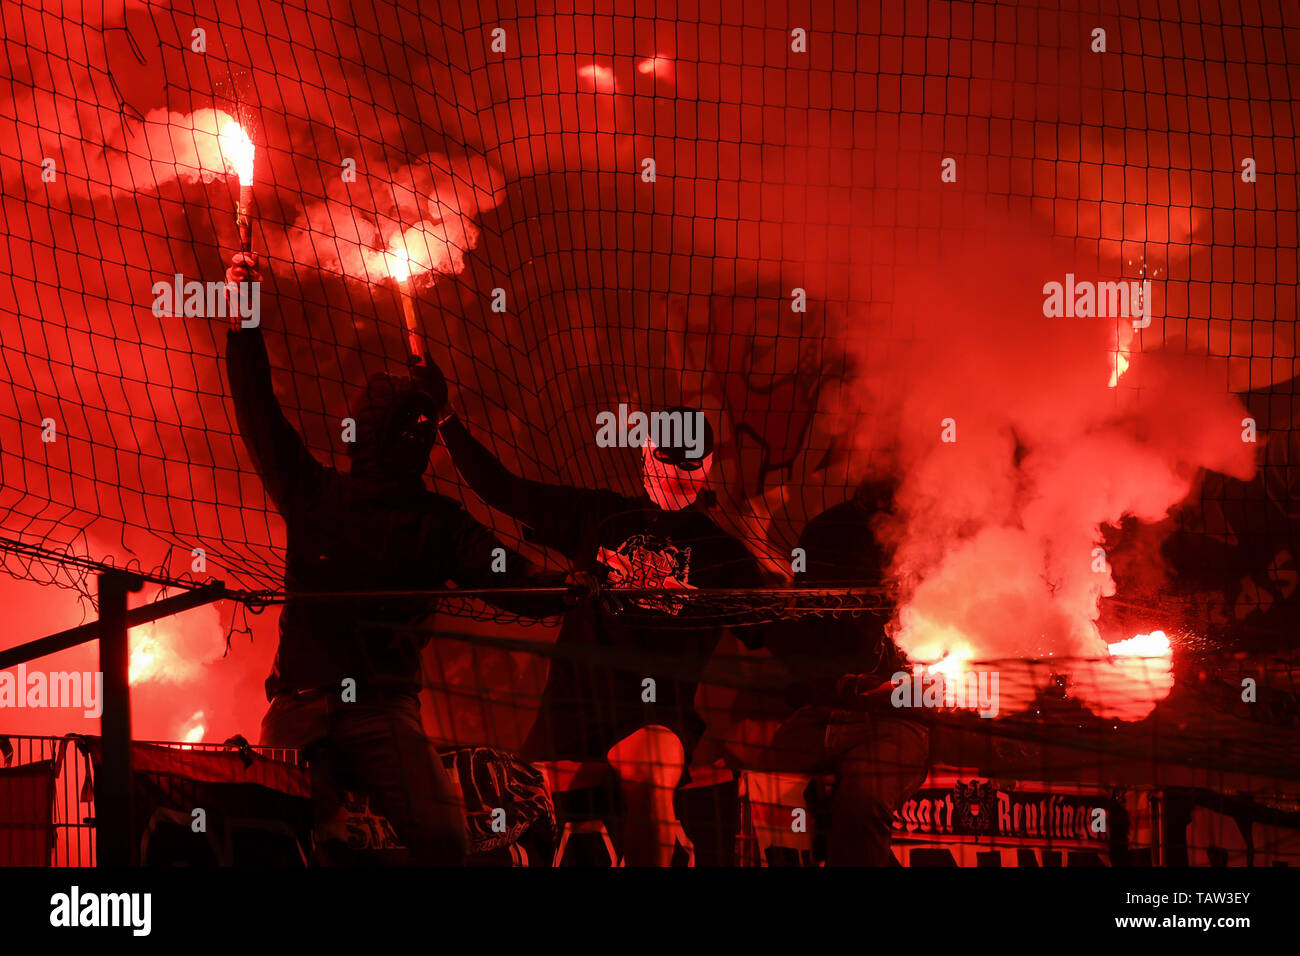 https://c8.alamy.com/comp/TAW3EY/berlin-deutschland-27th-may-2019-stuttgart-fans-bengalos-bengalo-bengalos-fireworks-flare-fans-audience-spectators-mood-atmosphere-stadium-27052019-berlin-football-relegation-to-the-bundesliga-union-berlin-vfb-stuttgart-dfbdfl-regulations-prohibit-any-use-of-photographs-as-image-sequences-andor-quasi-video-usage-worldwide-credit-dpaalamy-live-news-TAW3EY.jpg